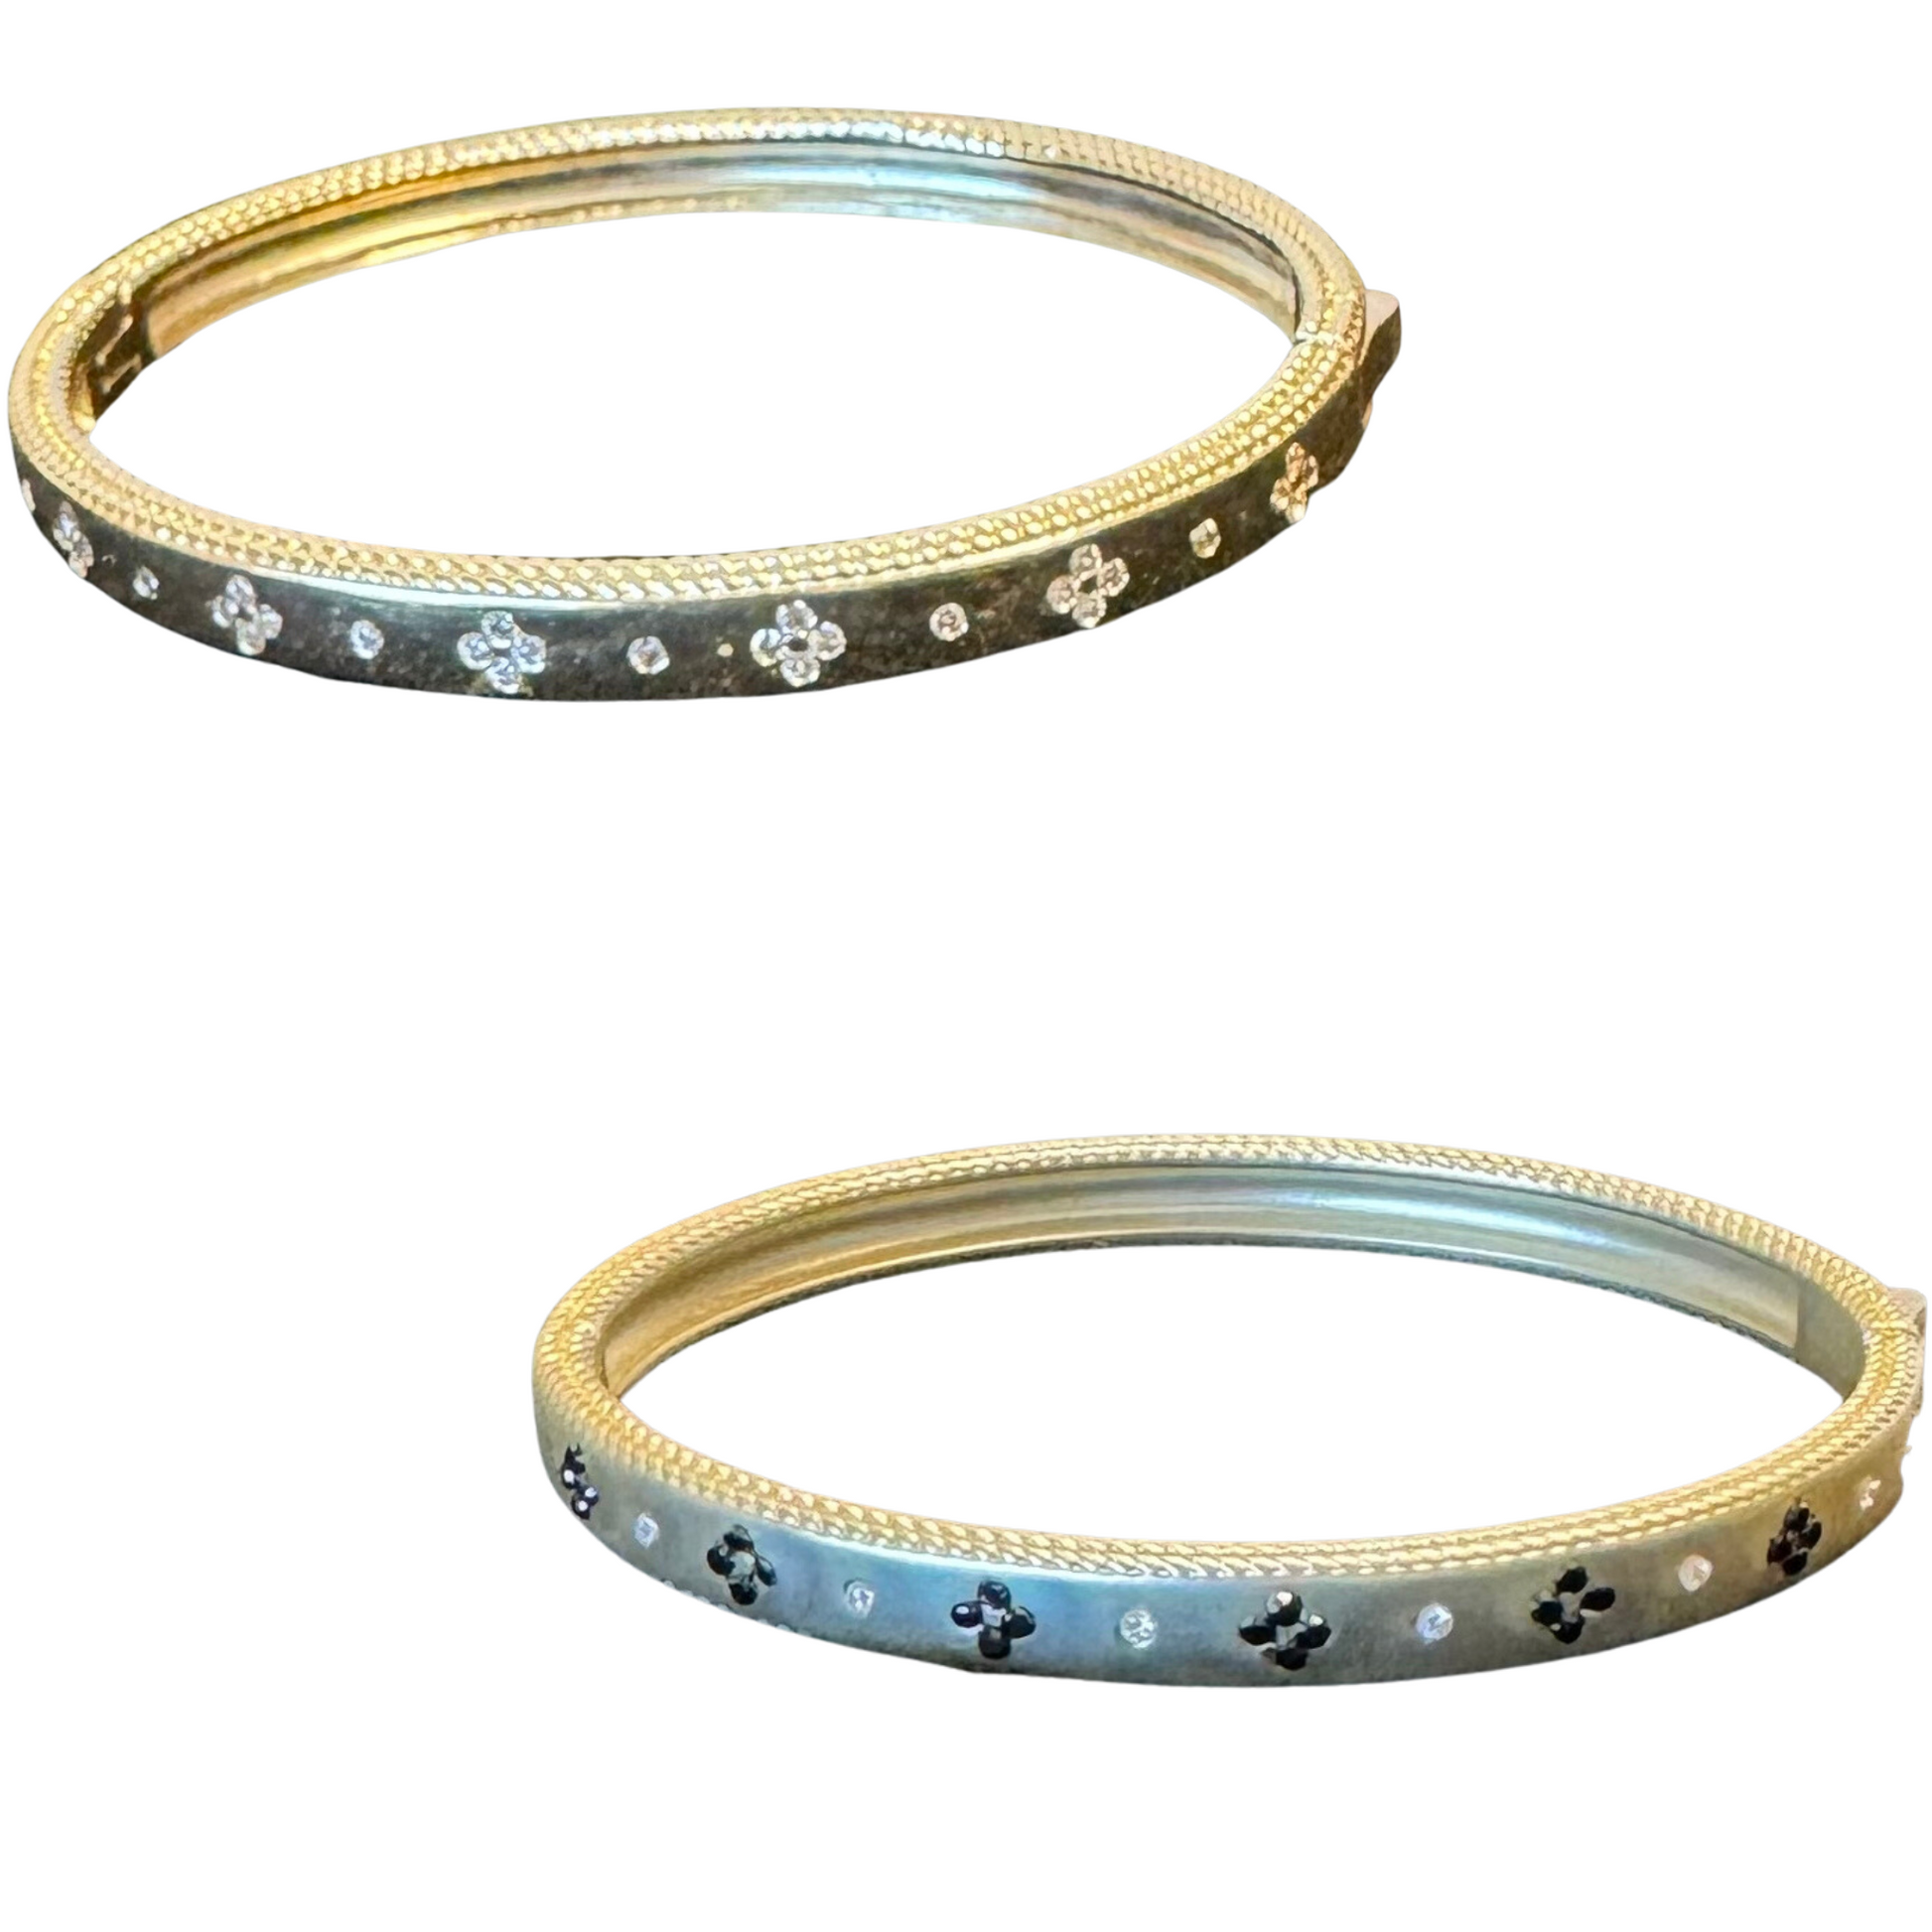 This delicate, gold Rhinestone Cuff Bangle adds luxurious style to any look. Featuring a dainty cuff bangle design, this piece is available with black or clear rhinestones for added sparkle.